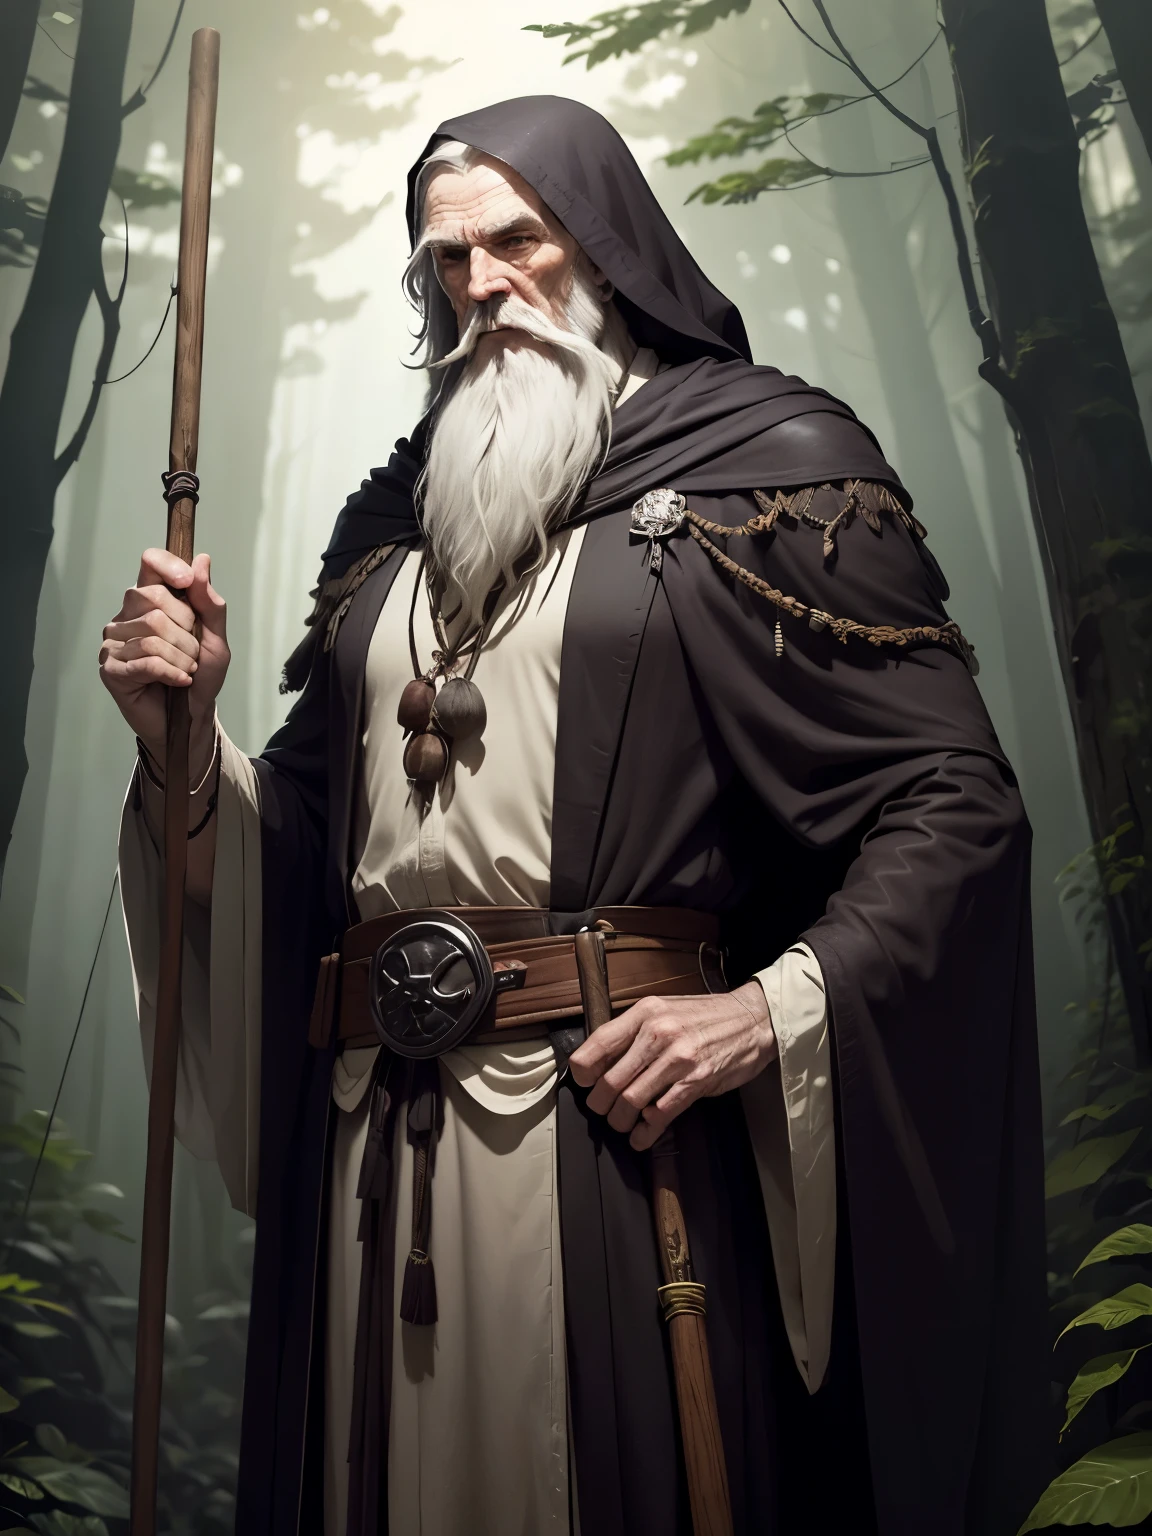 Elderly gentleman with a white beard(druid)(slender physique), wearing a dark brown robe, rope on a belt with herbs, plants and pouches hanging from it, leaning on his walking stick with a raven skull, standing in the gloomy forest